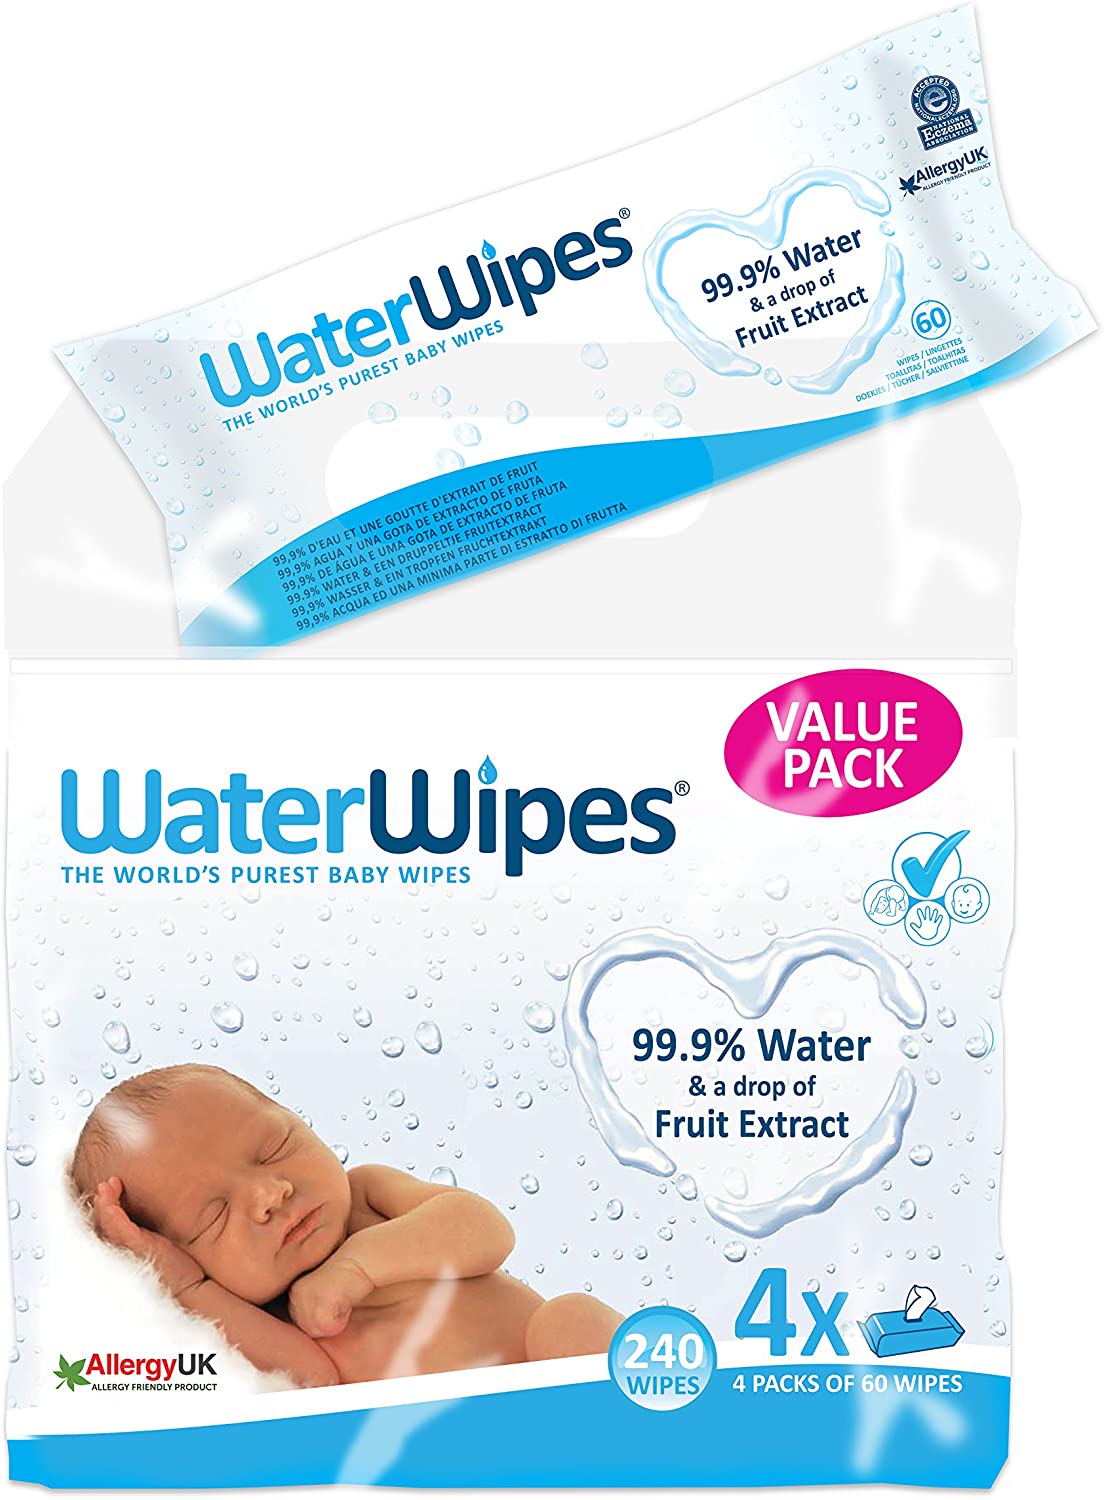 WaterWipes Baby Wipes, 4 x 60 pack = 240 wipes